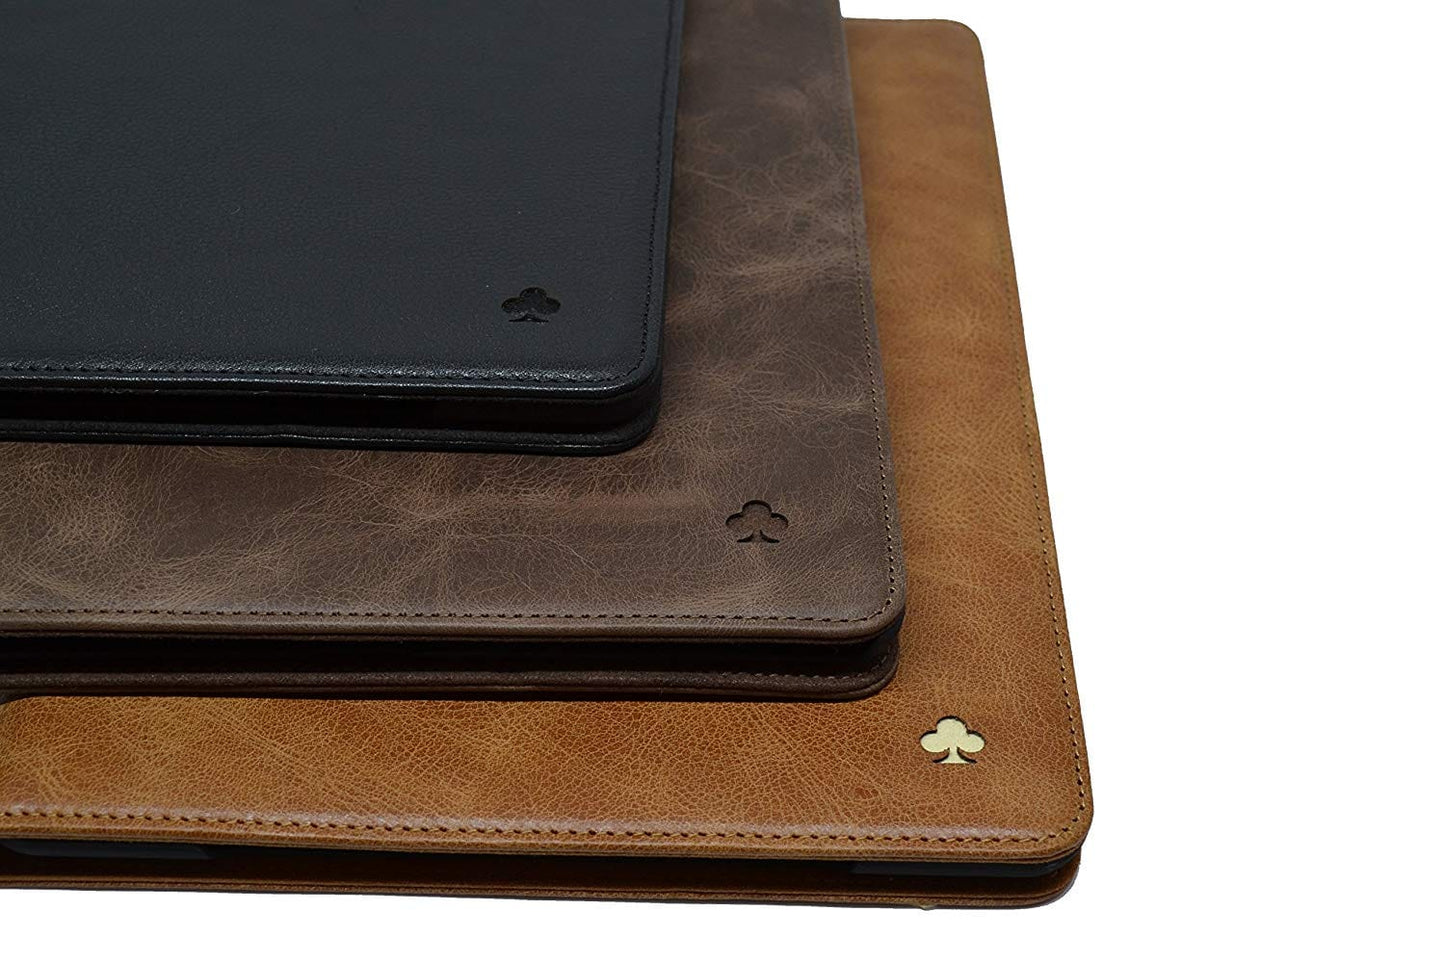 iPad Pro 10.5" (iPad Pro 2) Leather Case. Premium Slim Genuine Leather Stand Case/Cover/Wallet (Chocolate Brown)